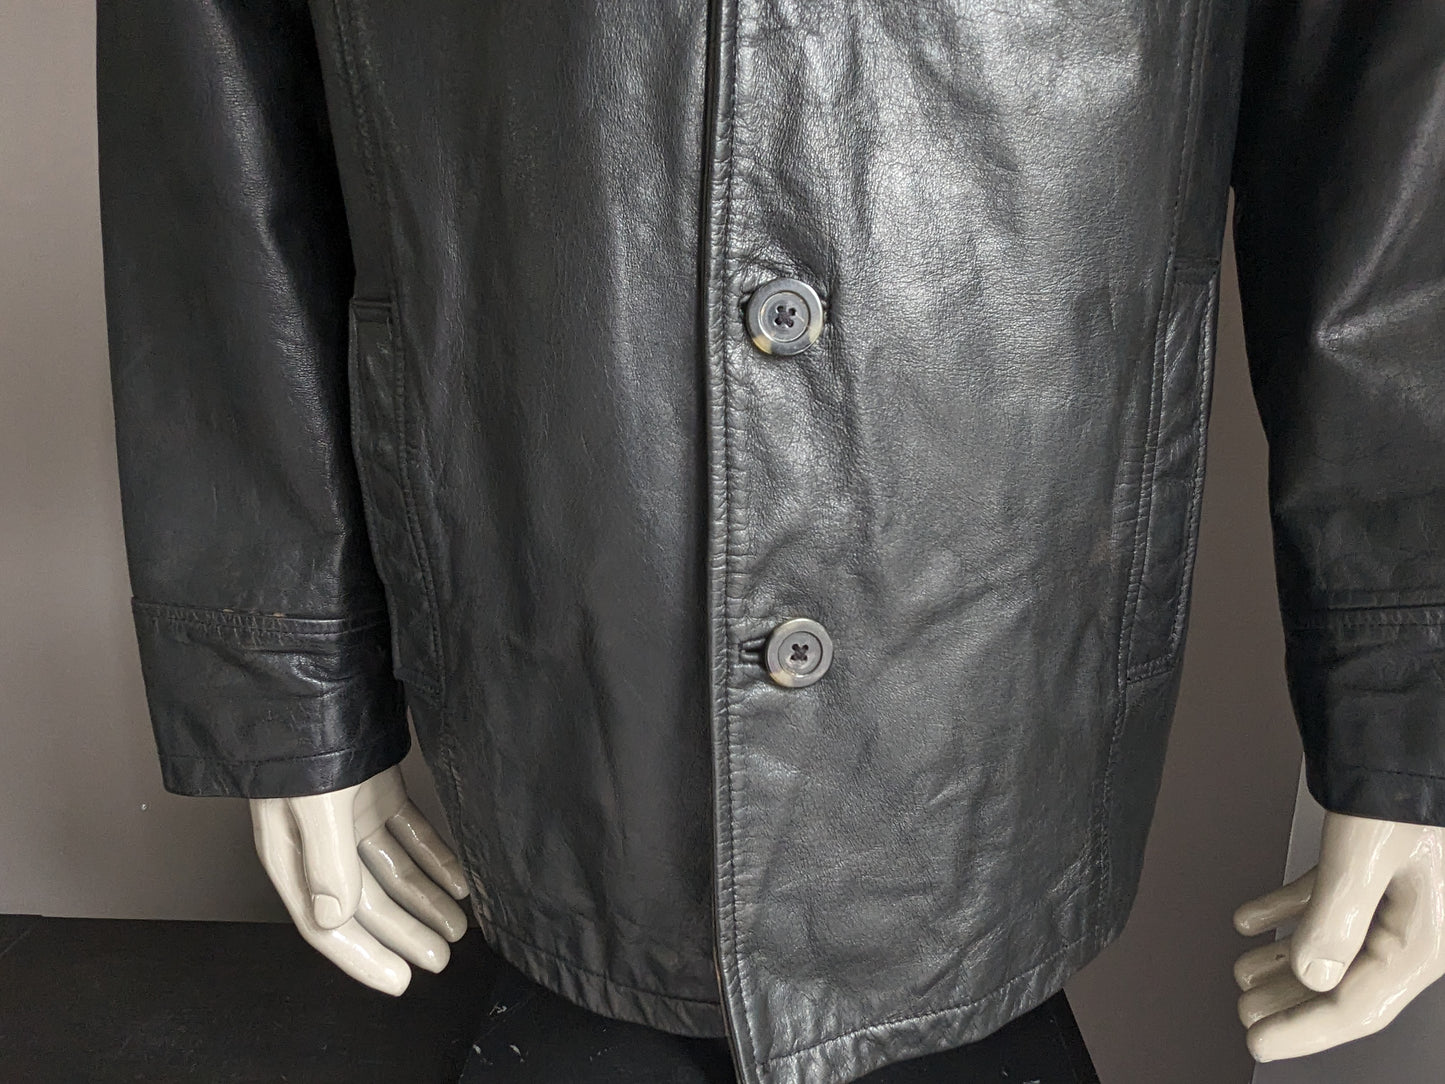 Leather jacket / jacket with buttons. Black colored. Size XL.